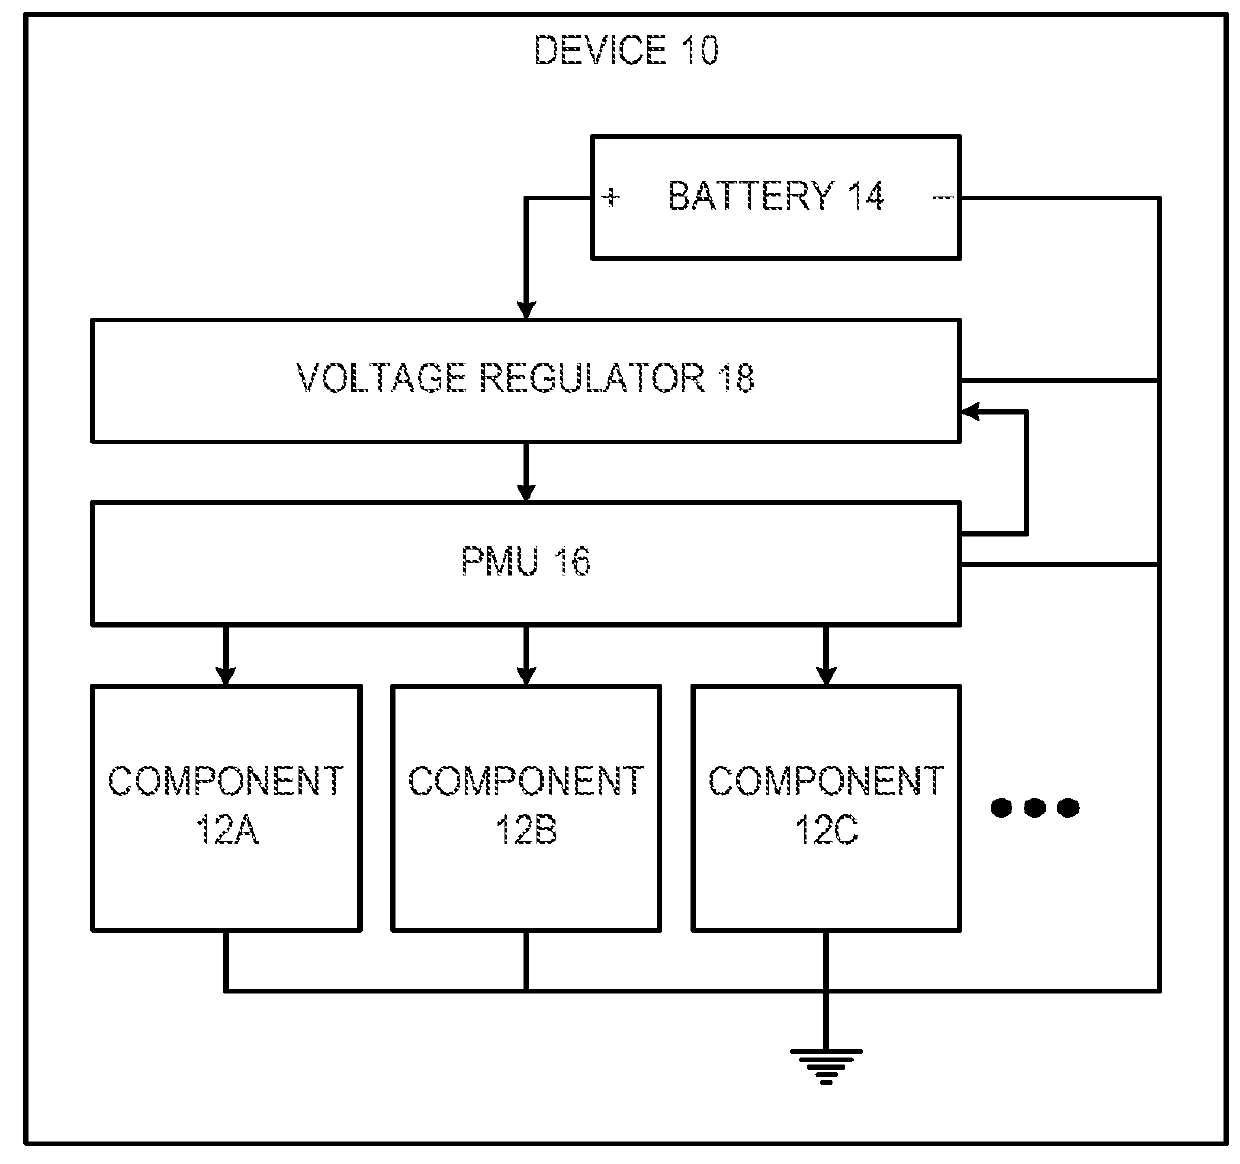 Supply-Voltage Control for Device Power Management